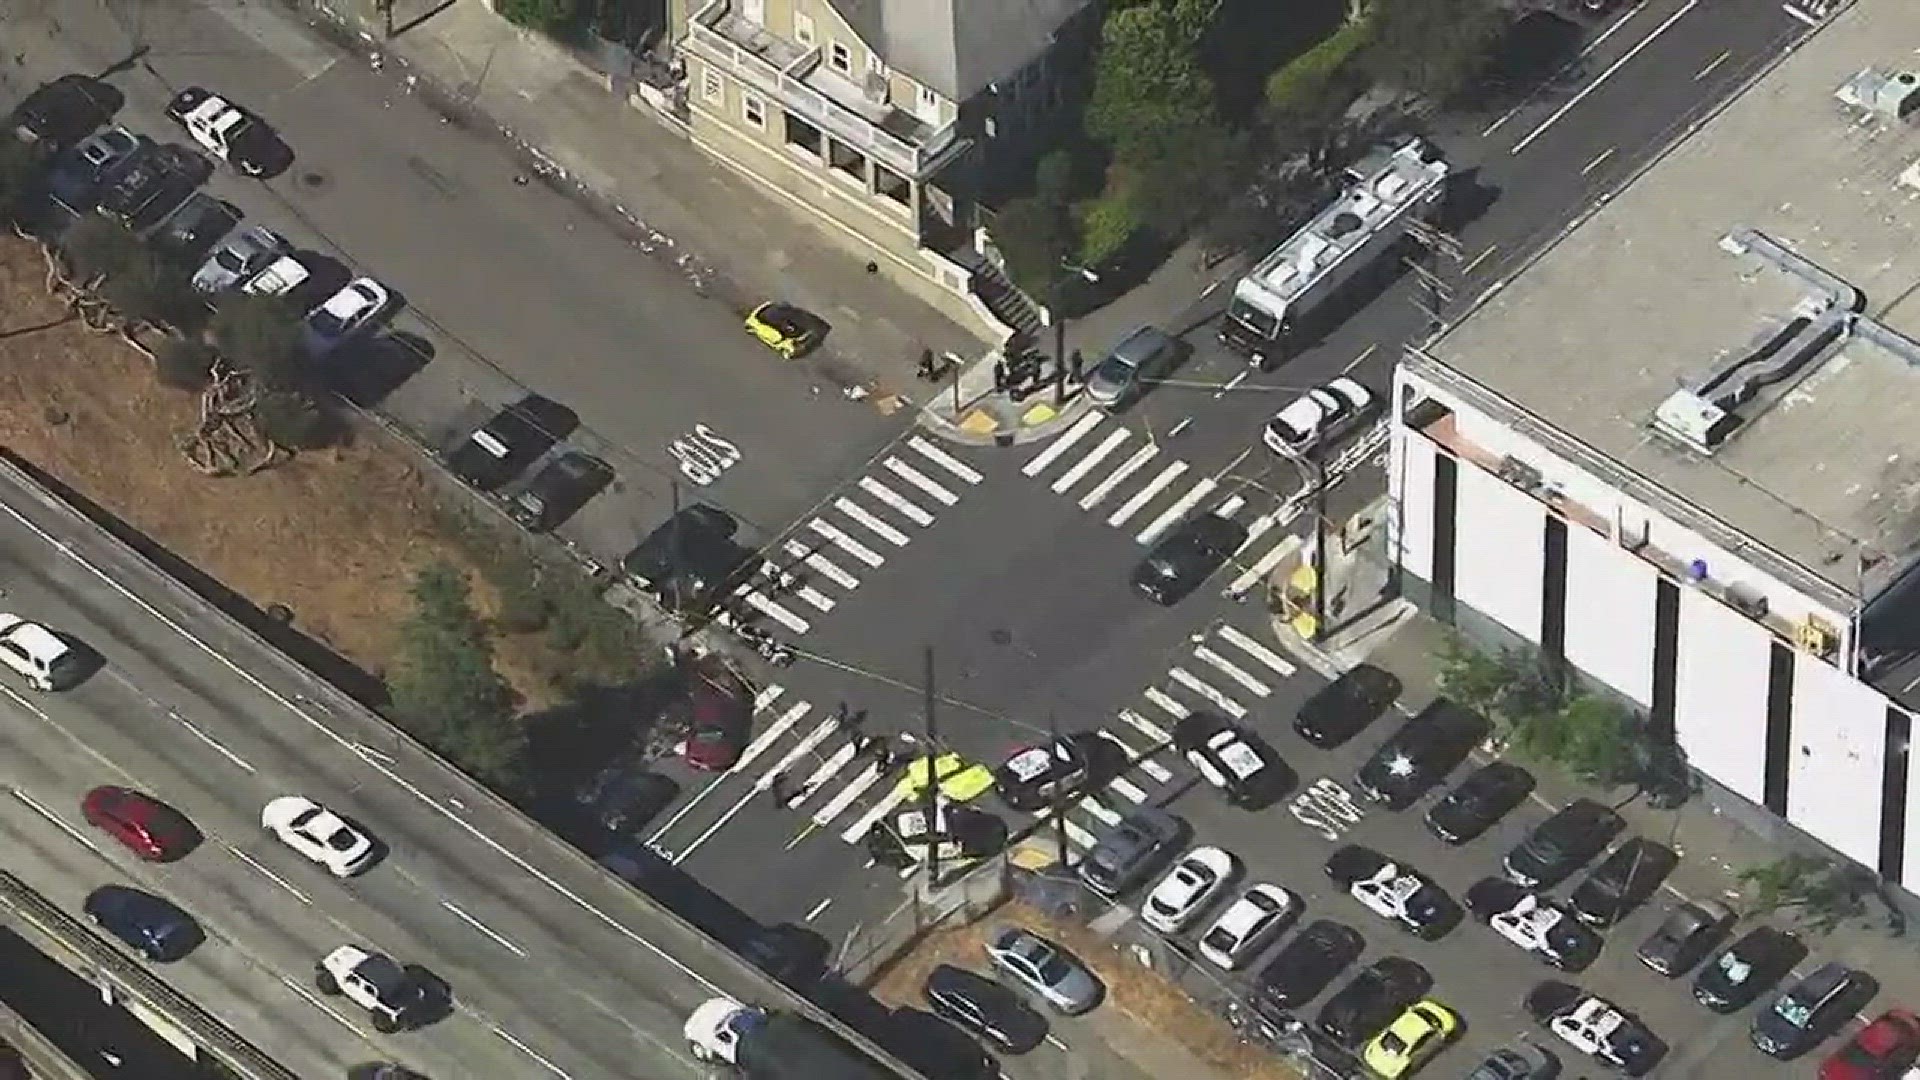 Multiple people have reportedly been injured in a shooting at UPS Customer Center in San Francisco. ABC10's Dina Kupfer reports.